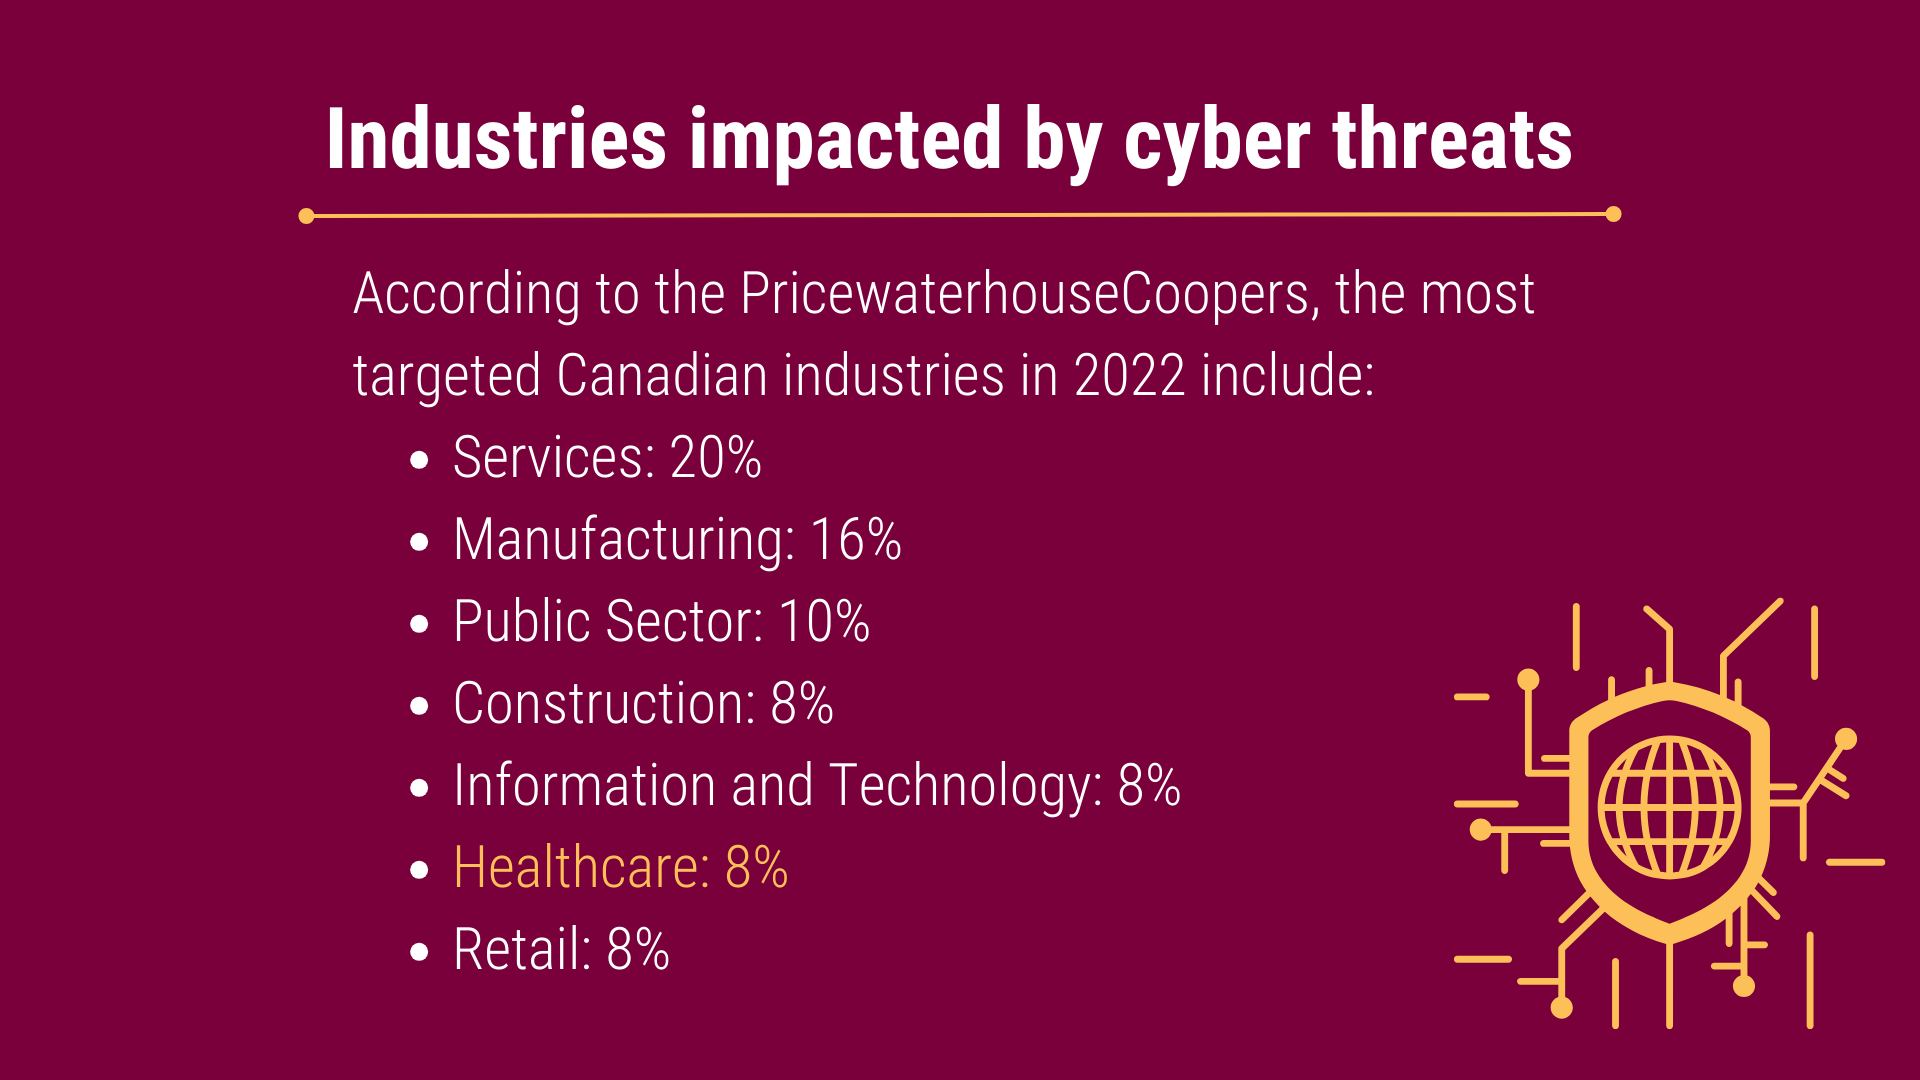 According to PricewaterhouseCoopers, healthcare is one of the most targeted Canadian industries.